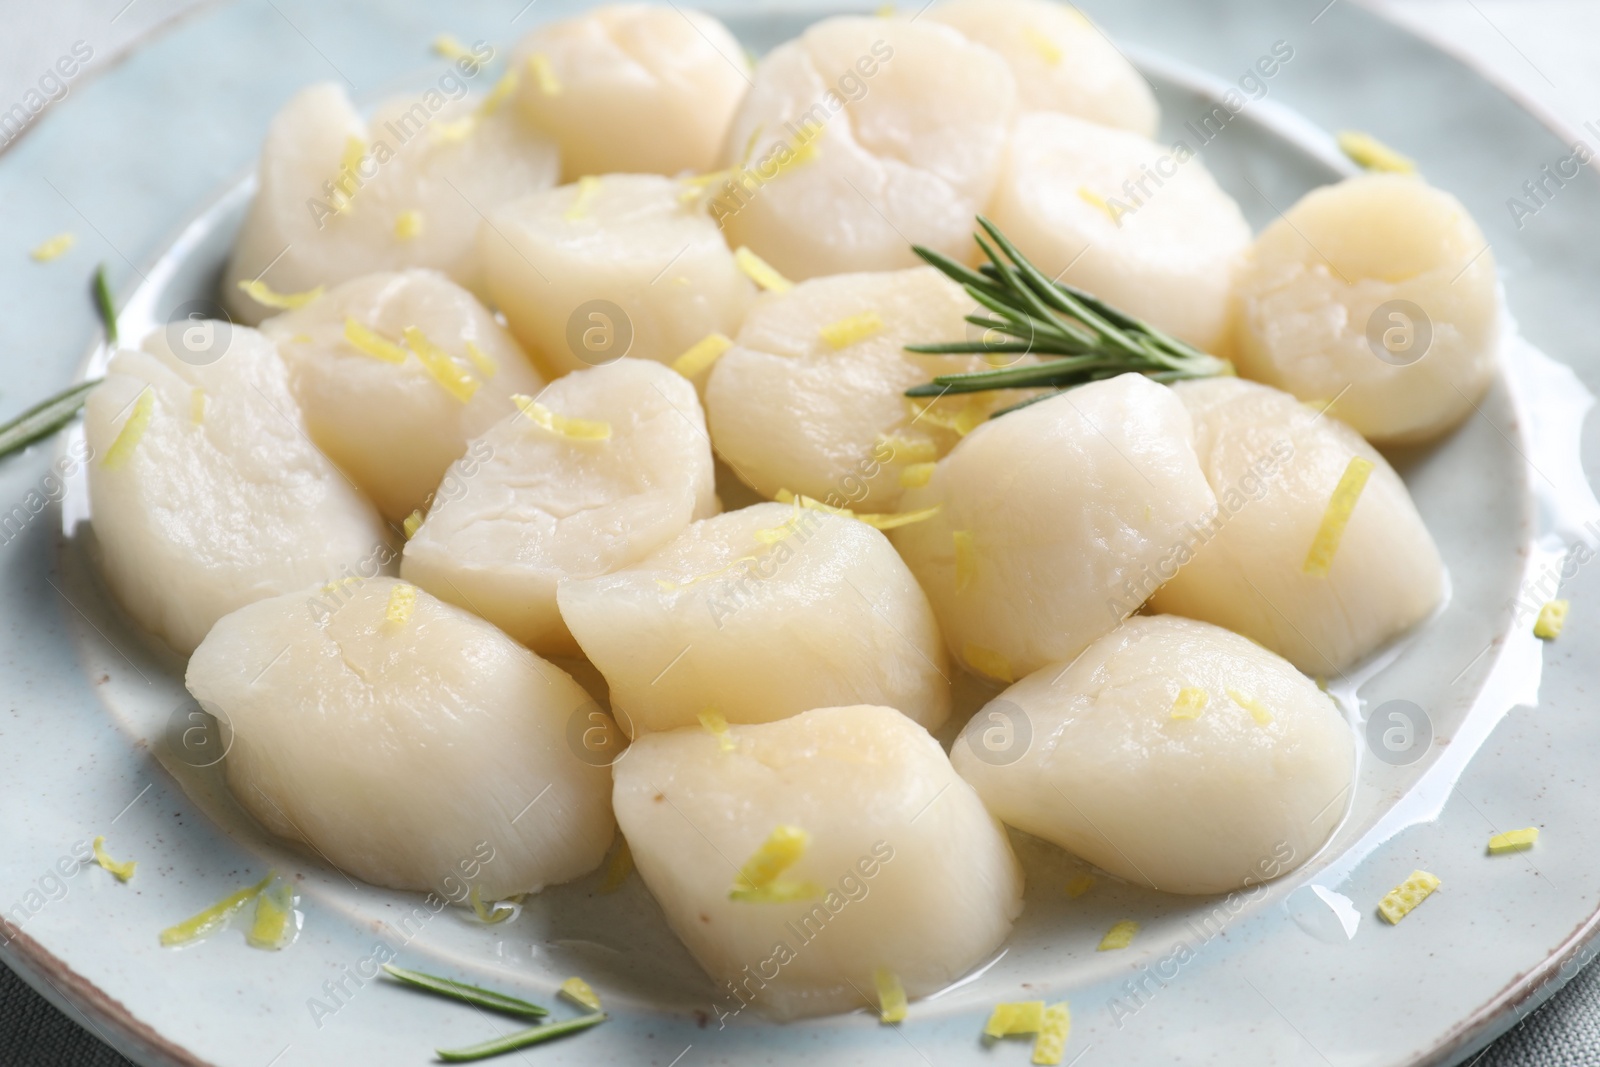 Photo of Raw scallops with lemon zest and rosemary on plate, closeup